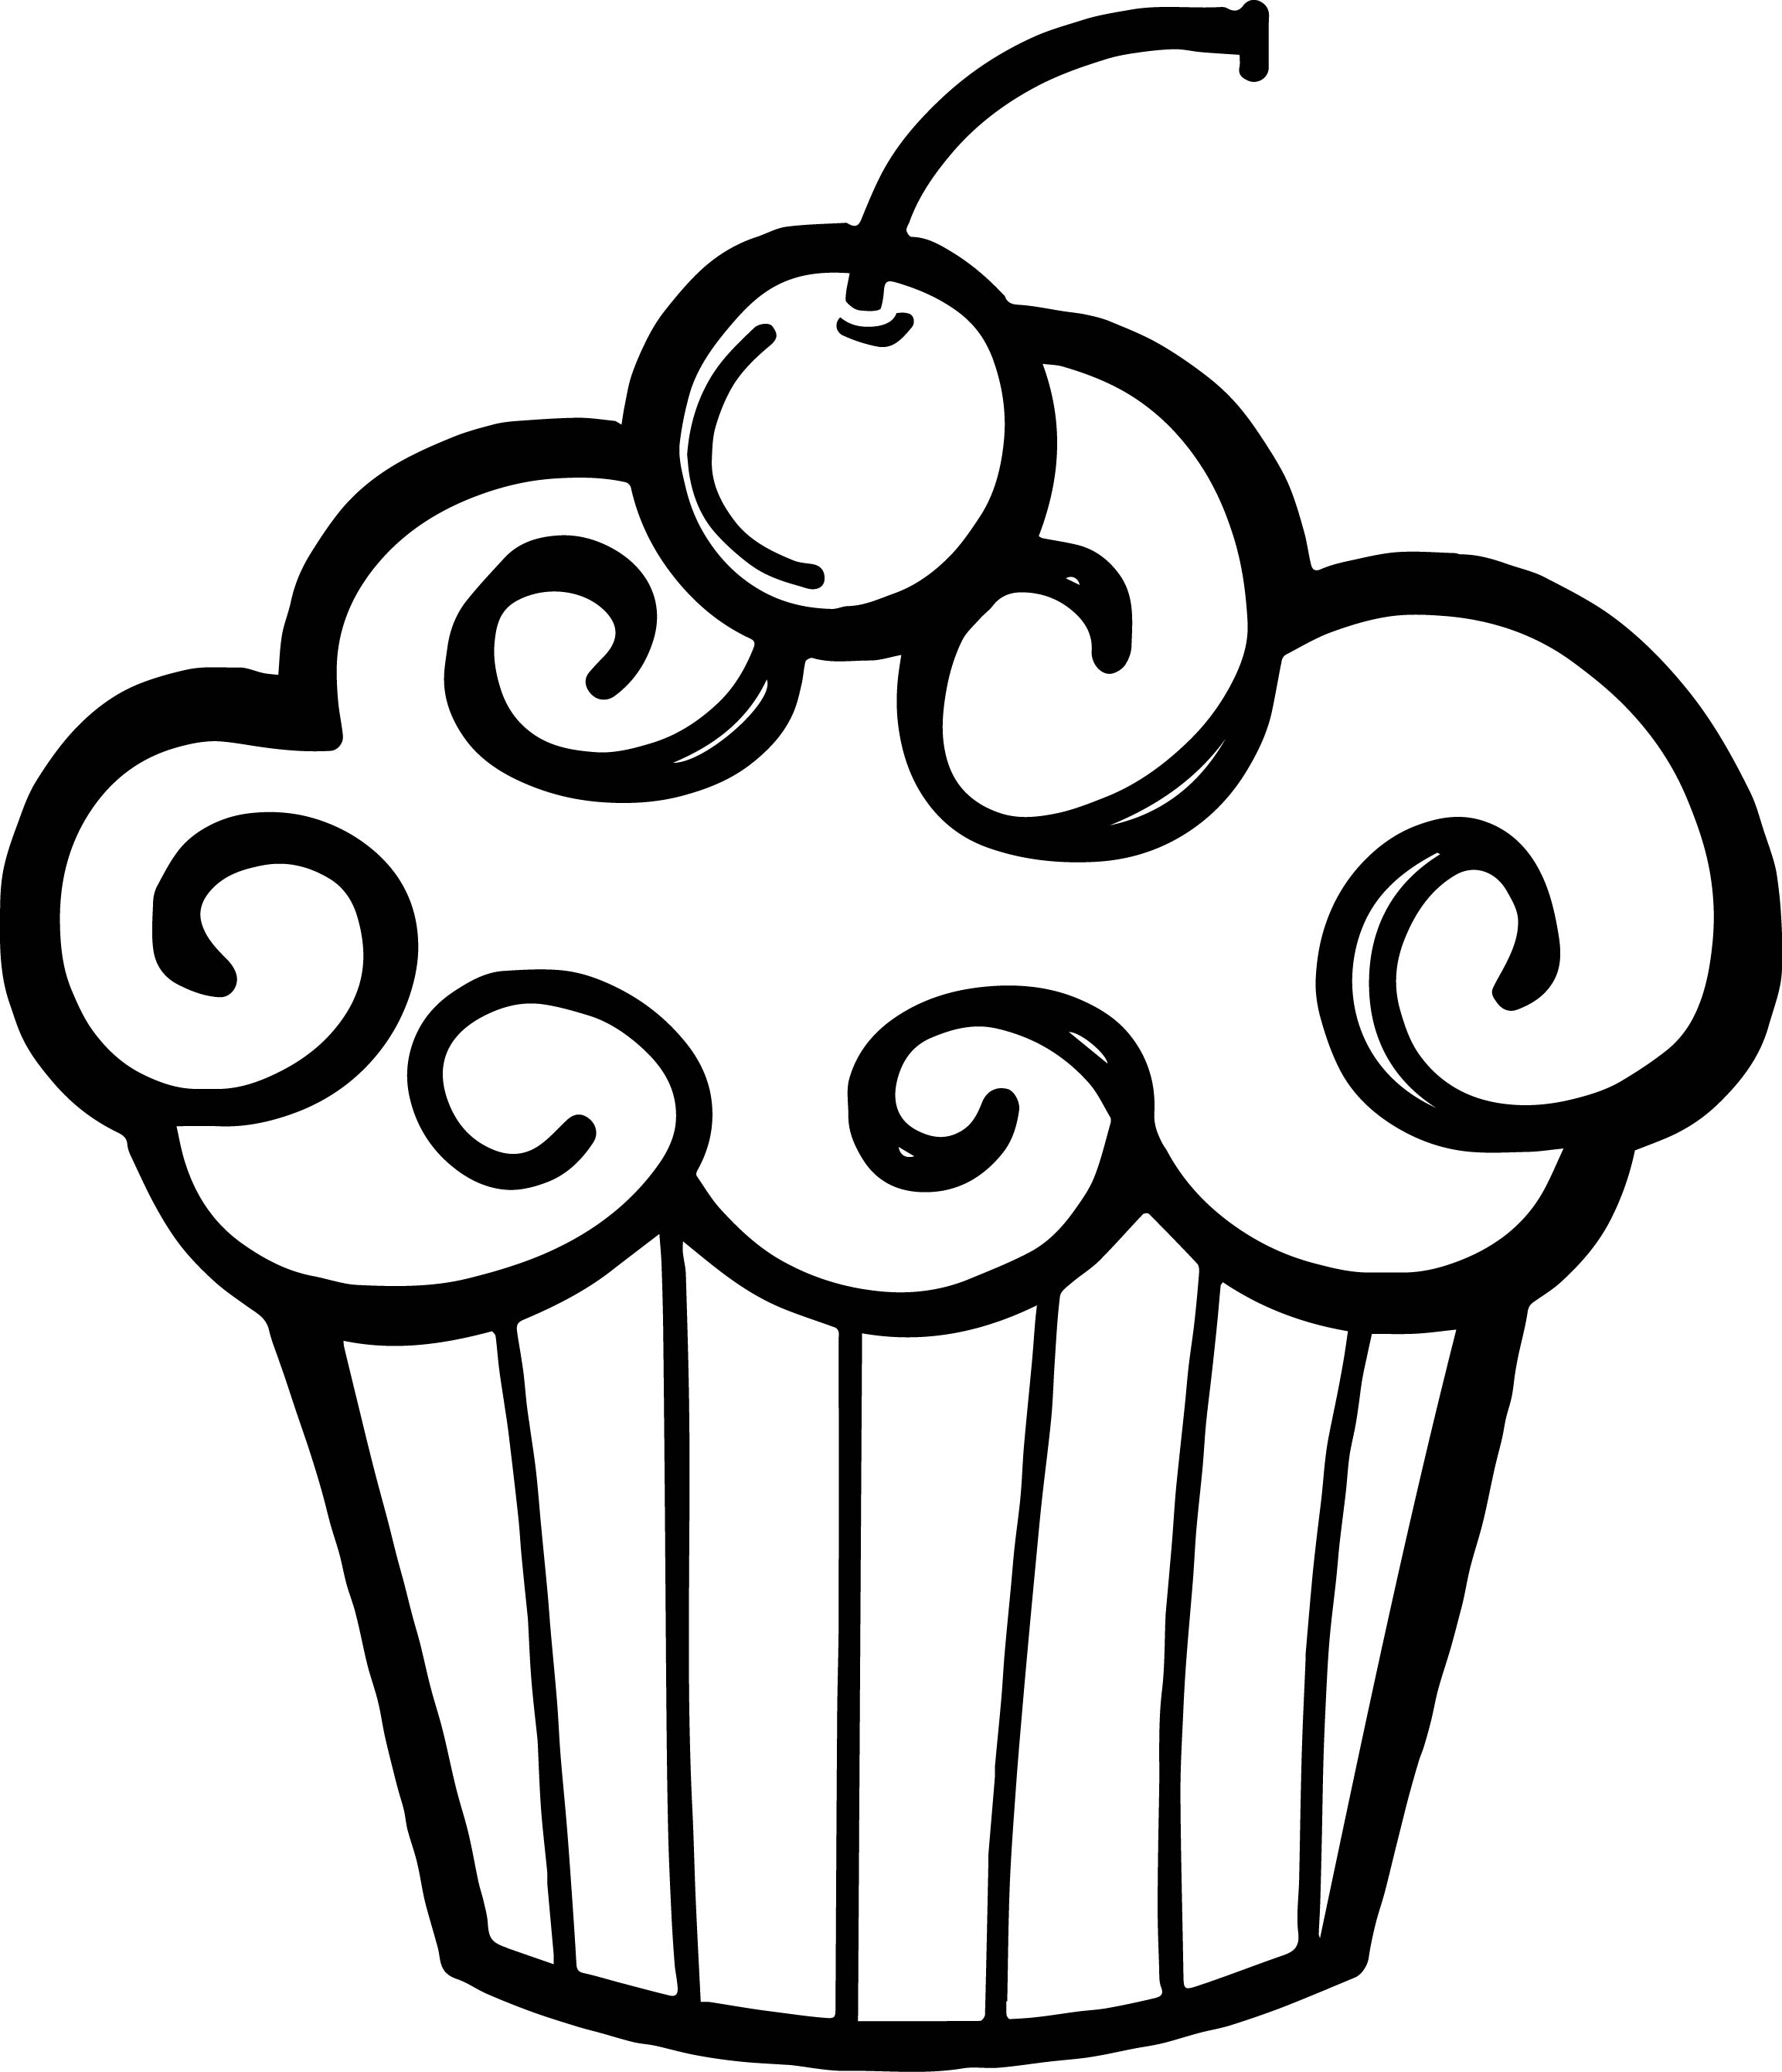 Cupcake black and white image of birthday clipart black and